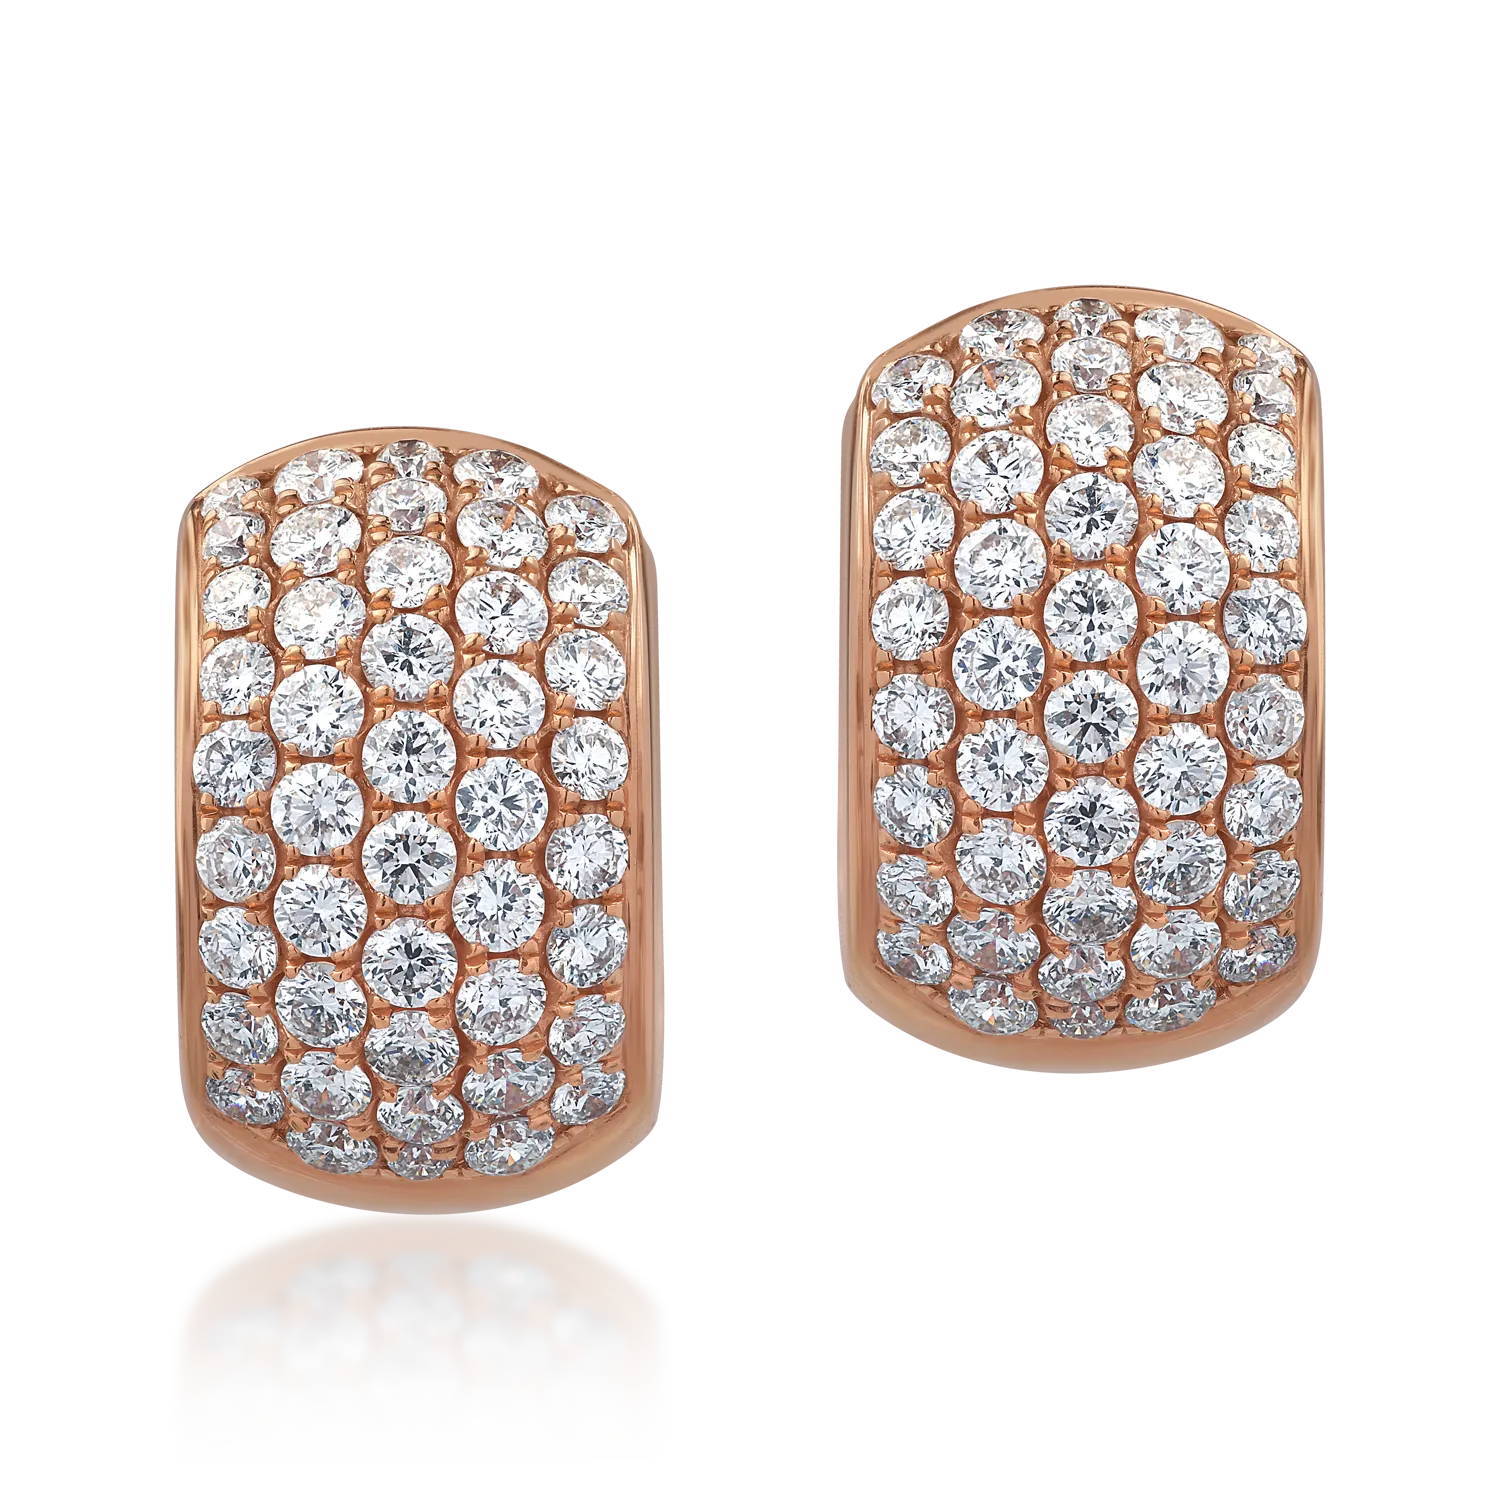 18K rose gold earrings with 0.92ct diamonds